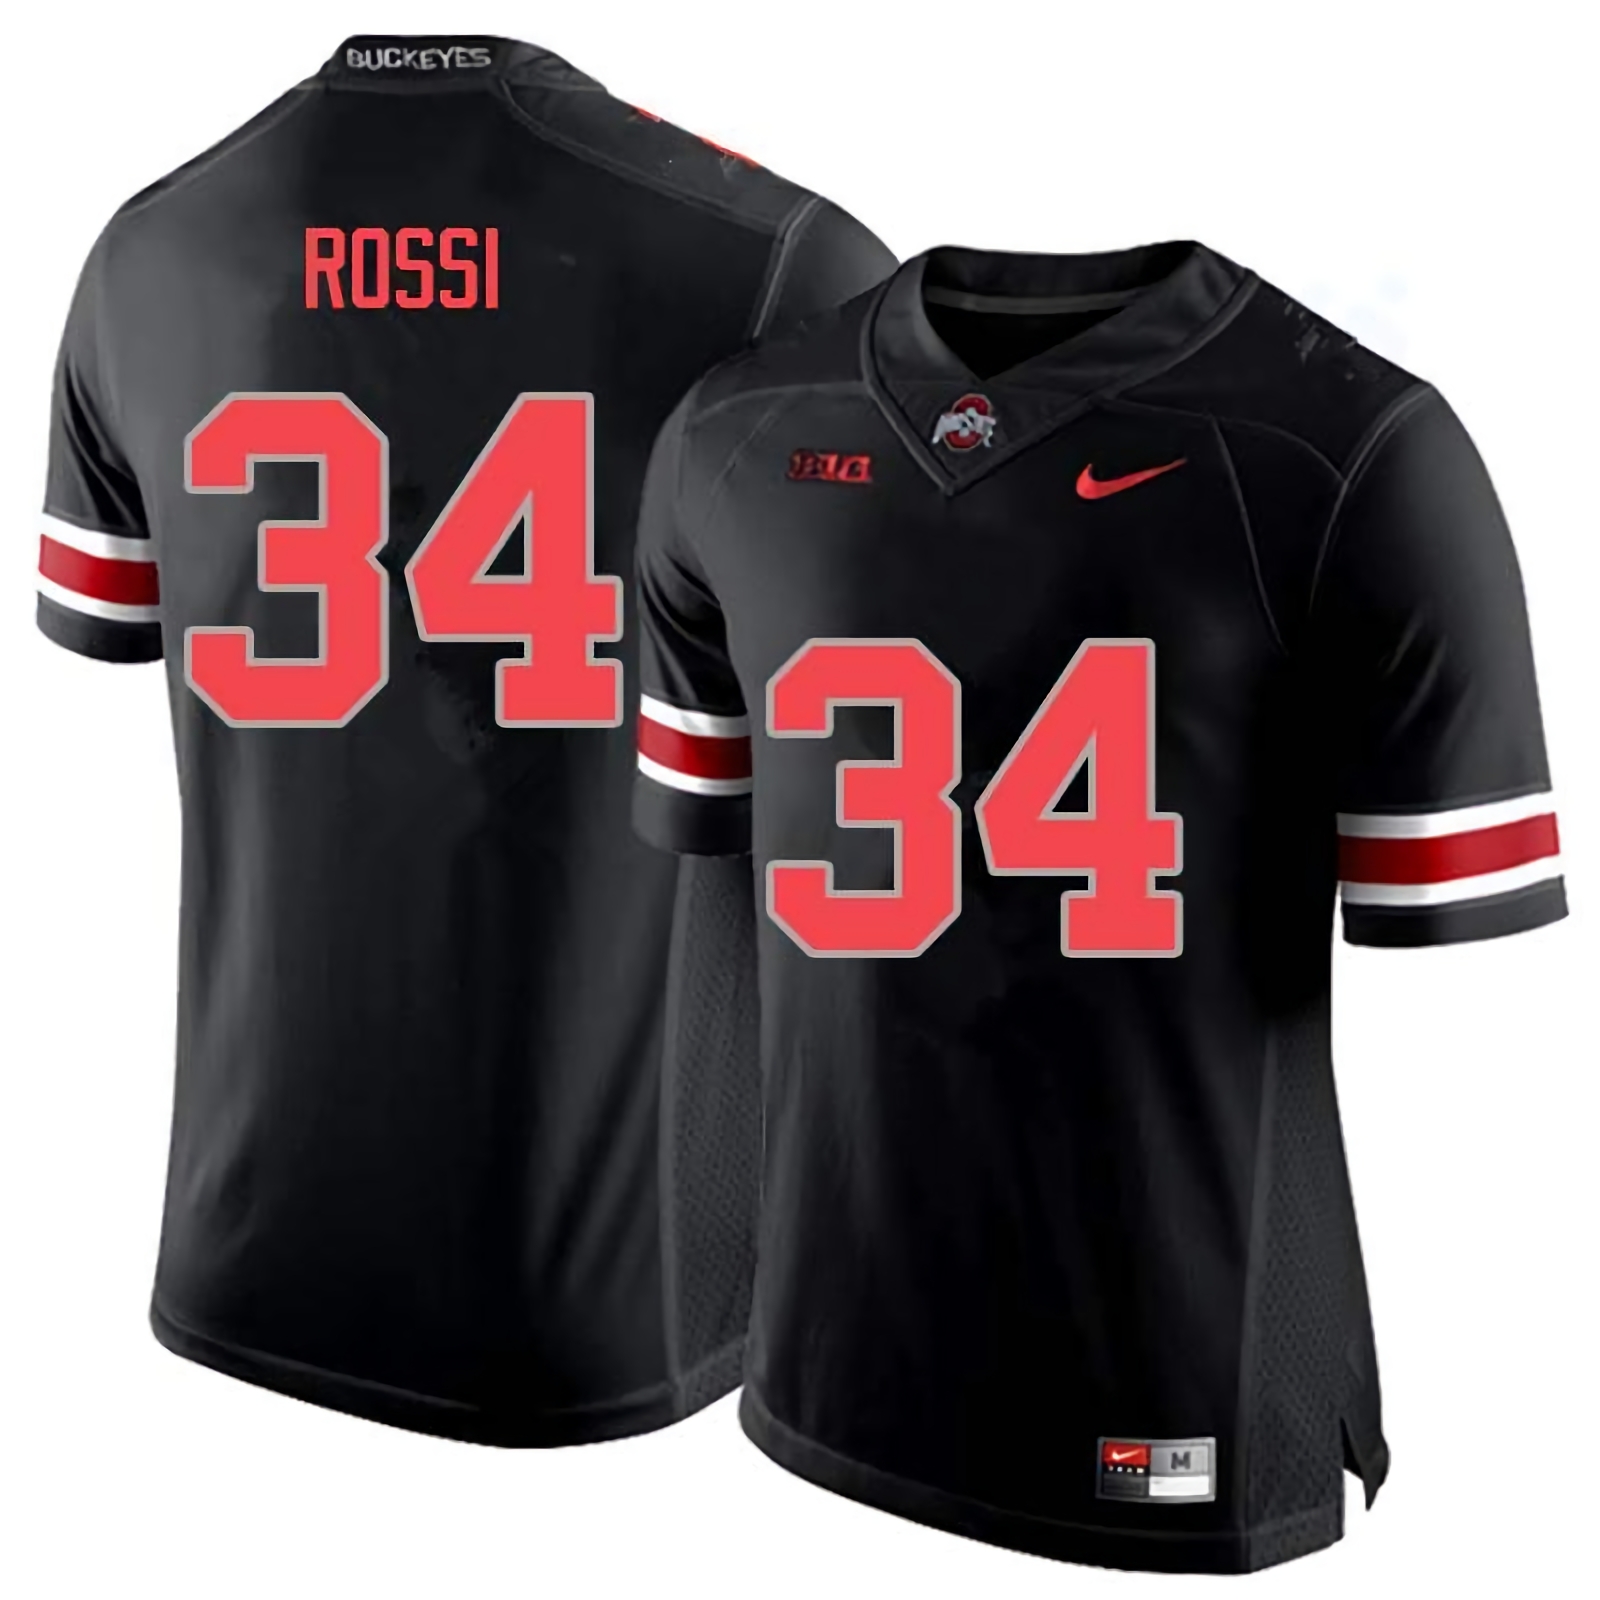 Mitch Rossi Ohio State Buckeyes Men's NCAA #34 Nike Blackout College Stitched Football Jersey UZH1756EY